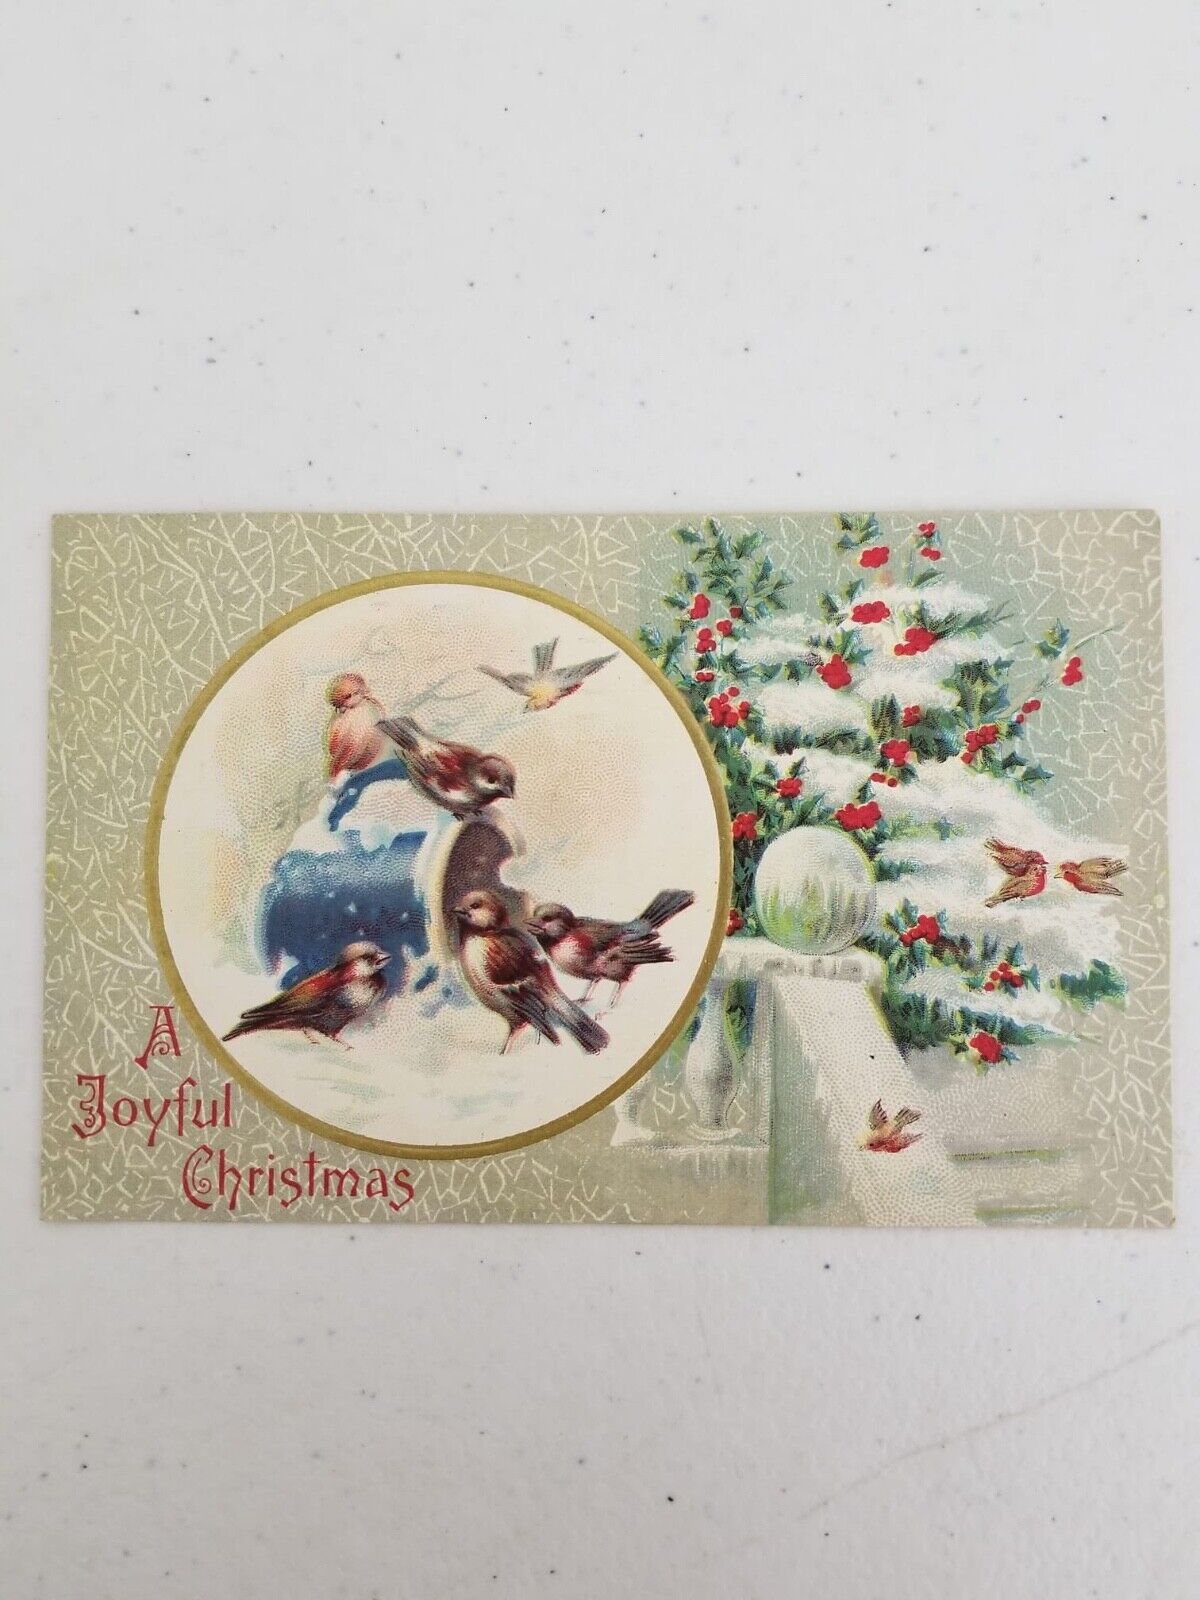 Charming Vintage Christmas Postcard Lot - 3 Early 1900s Holiday Greetings with Birds and Nature Scenes - TreasuTiques